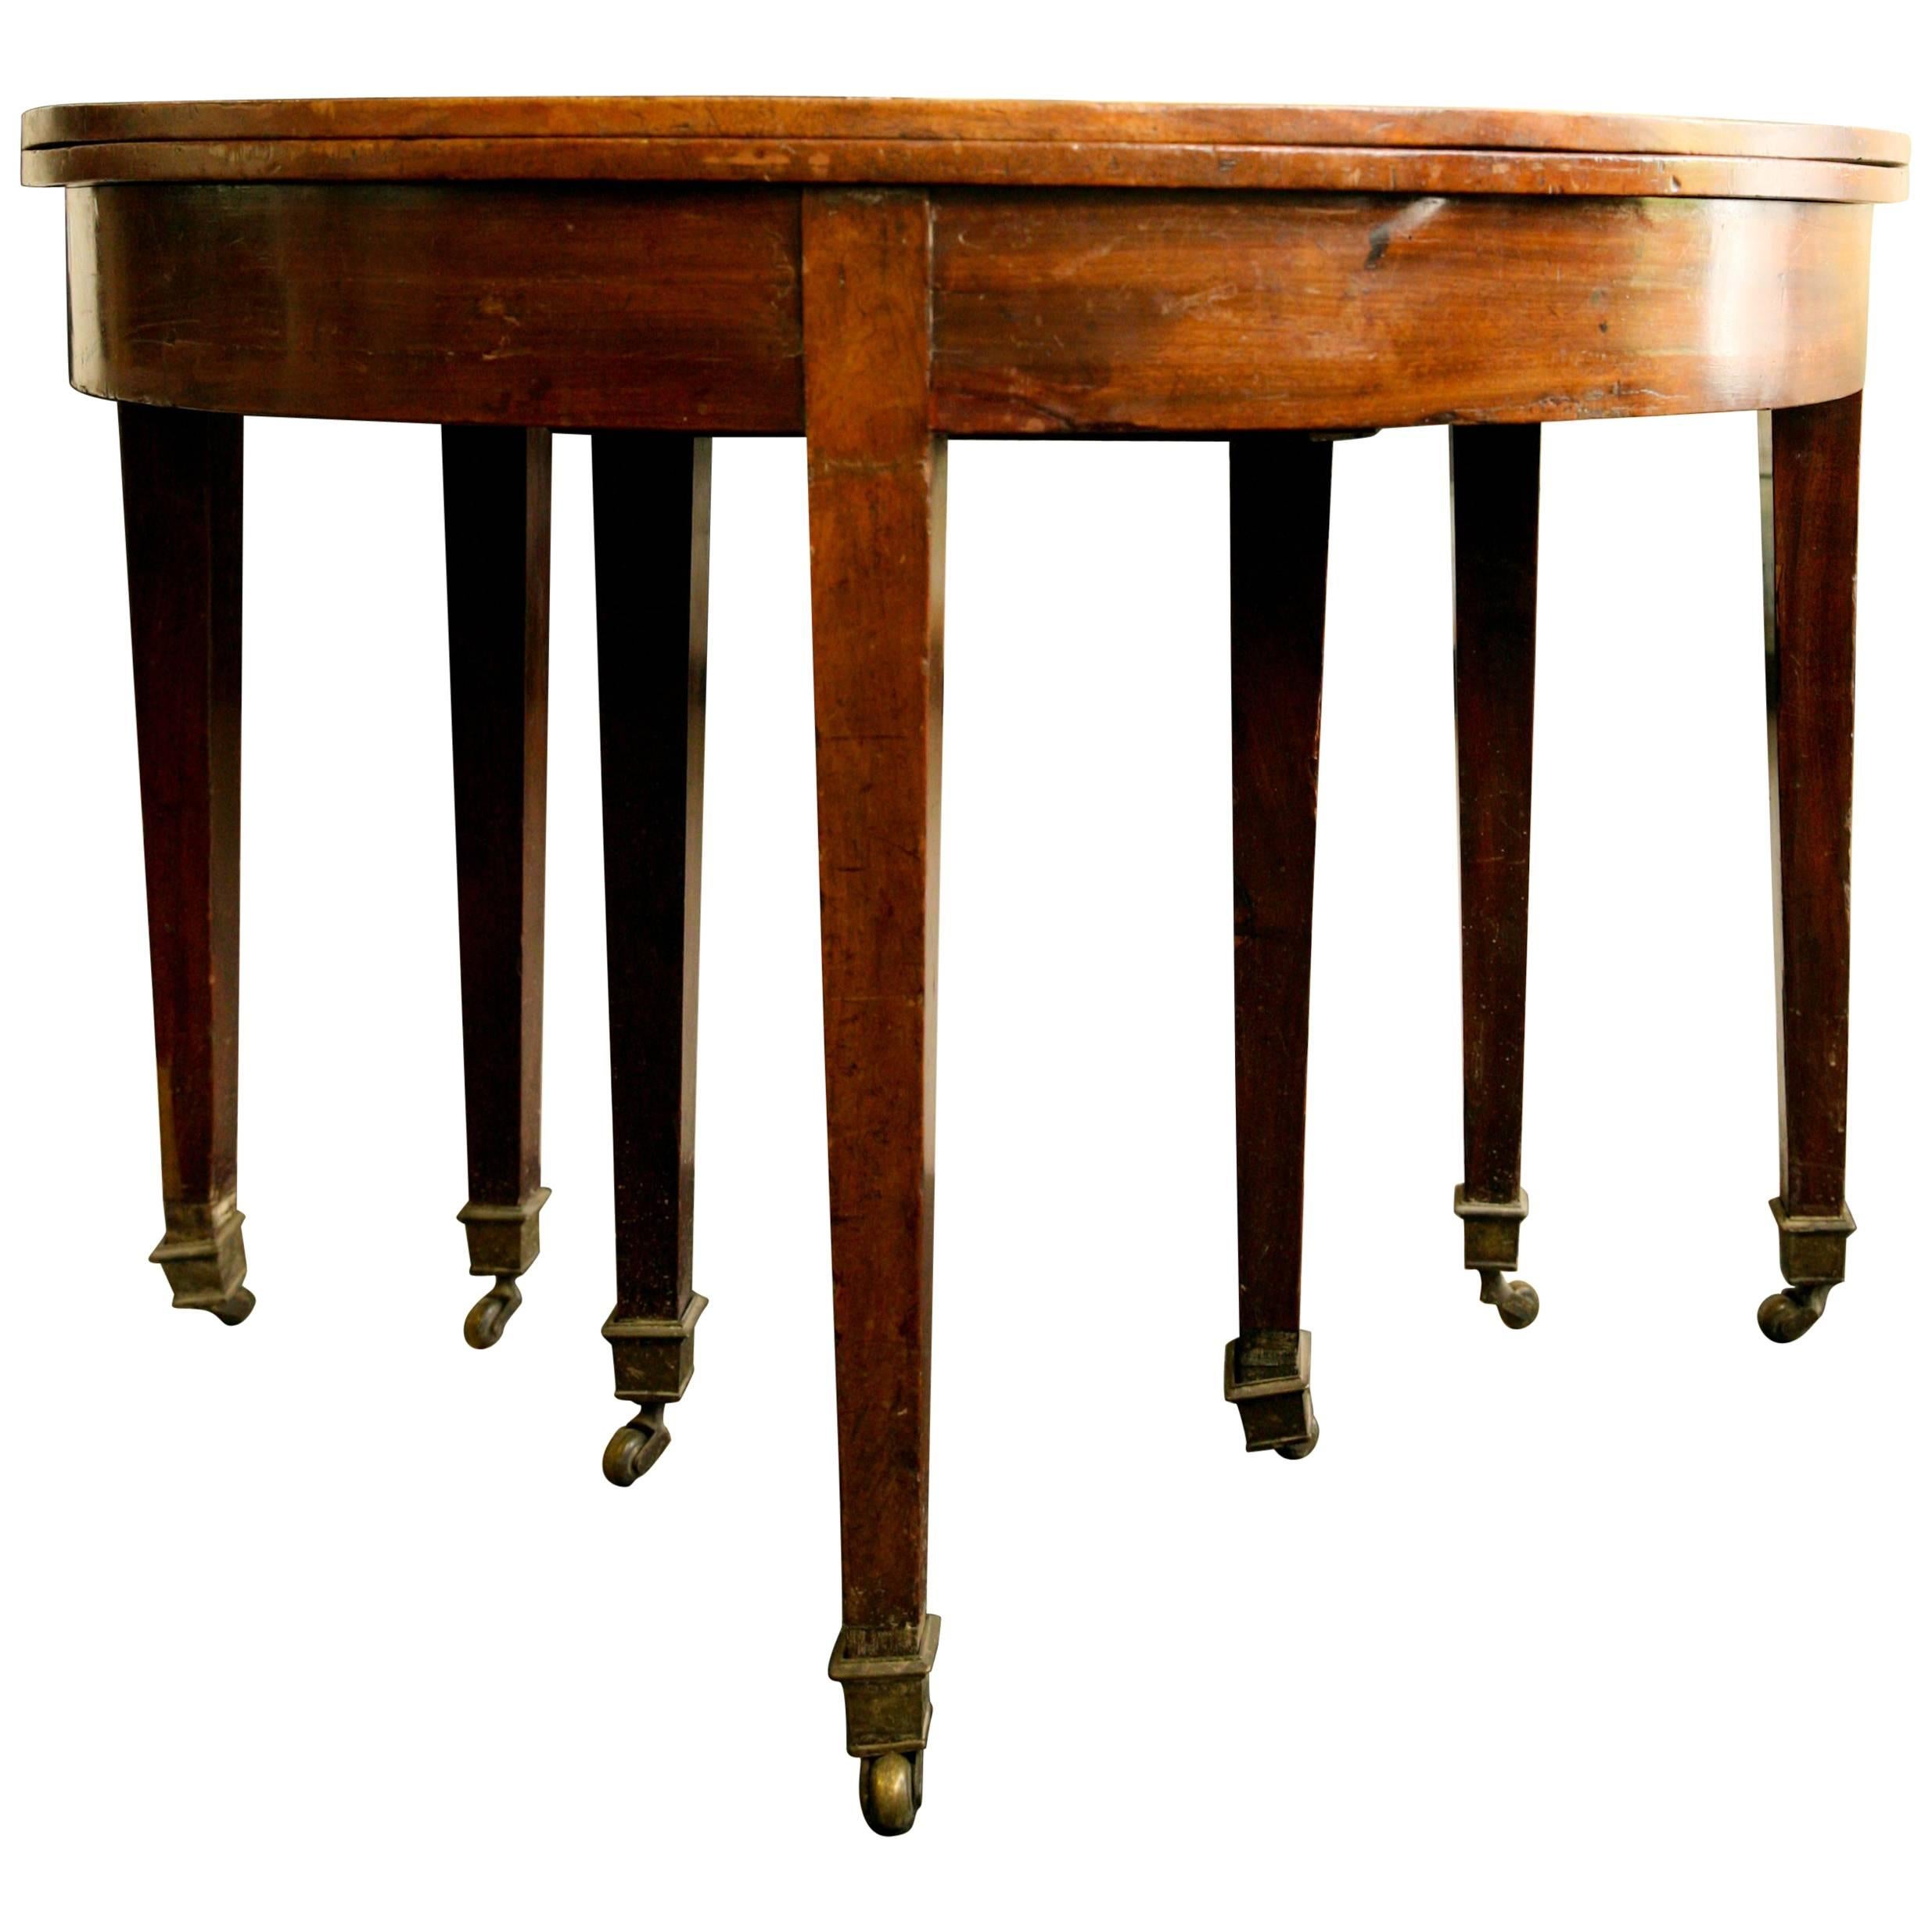 19th Century French Mahogany Folding Demilune Console Table with Hidden Drawer